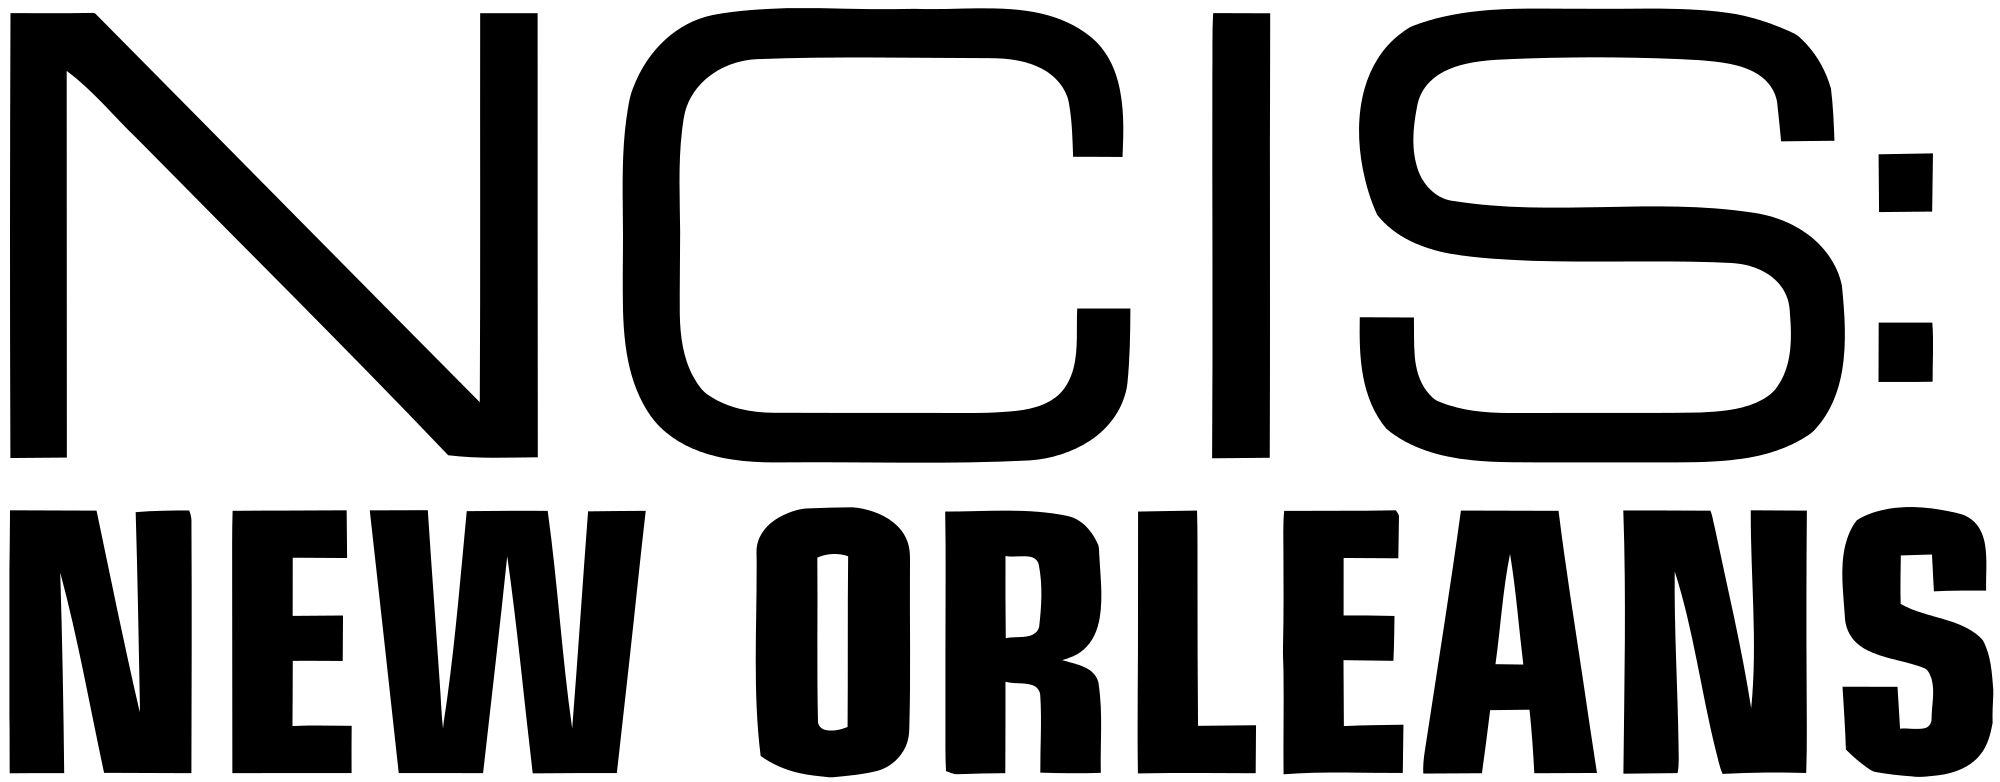 New Orleans Logo - File:NCIS- New Orleans - Logo.svg - Wikimedia Commons